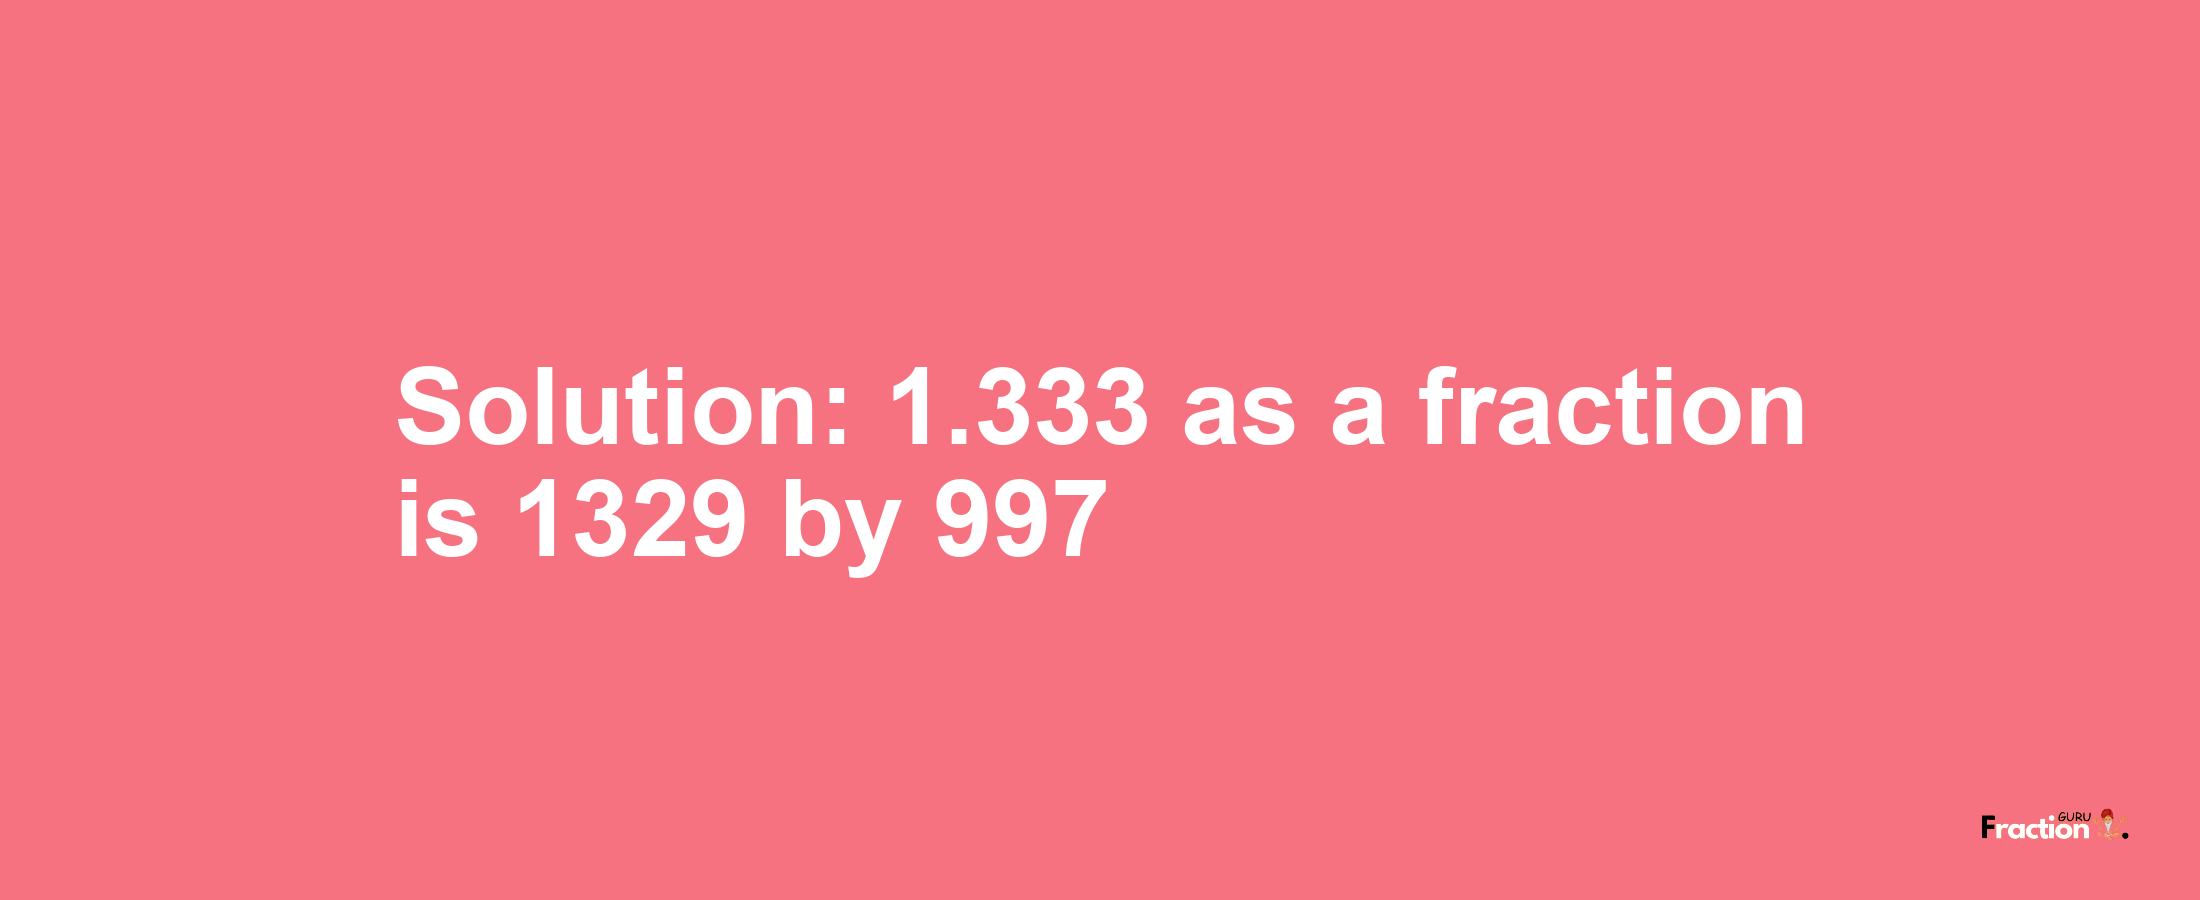 Solution:1.333 as a fraction is 1329/997